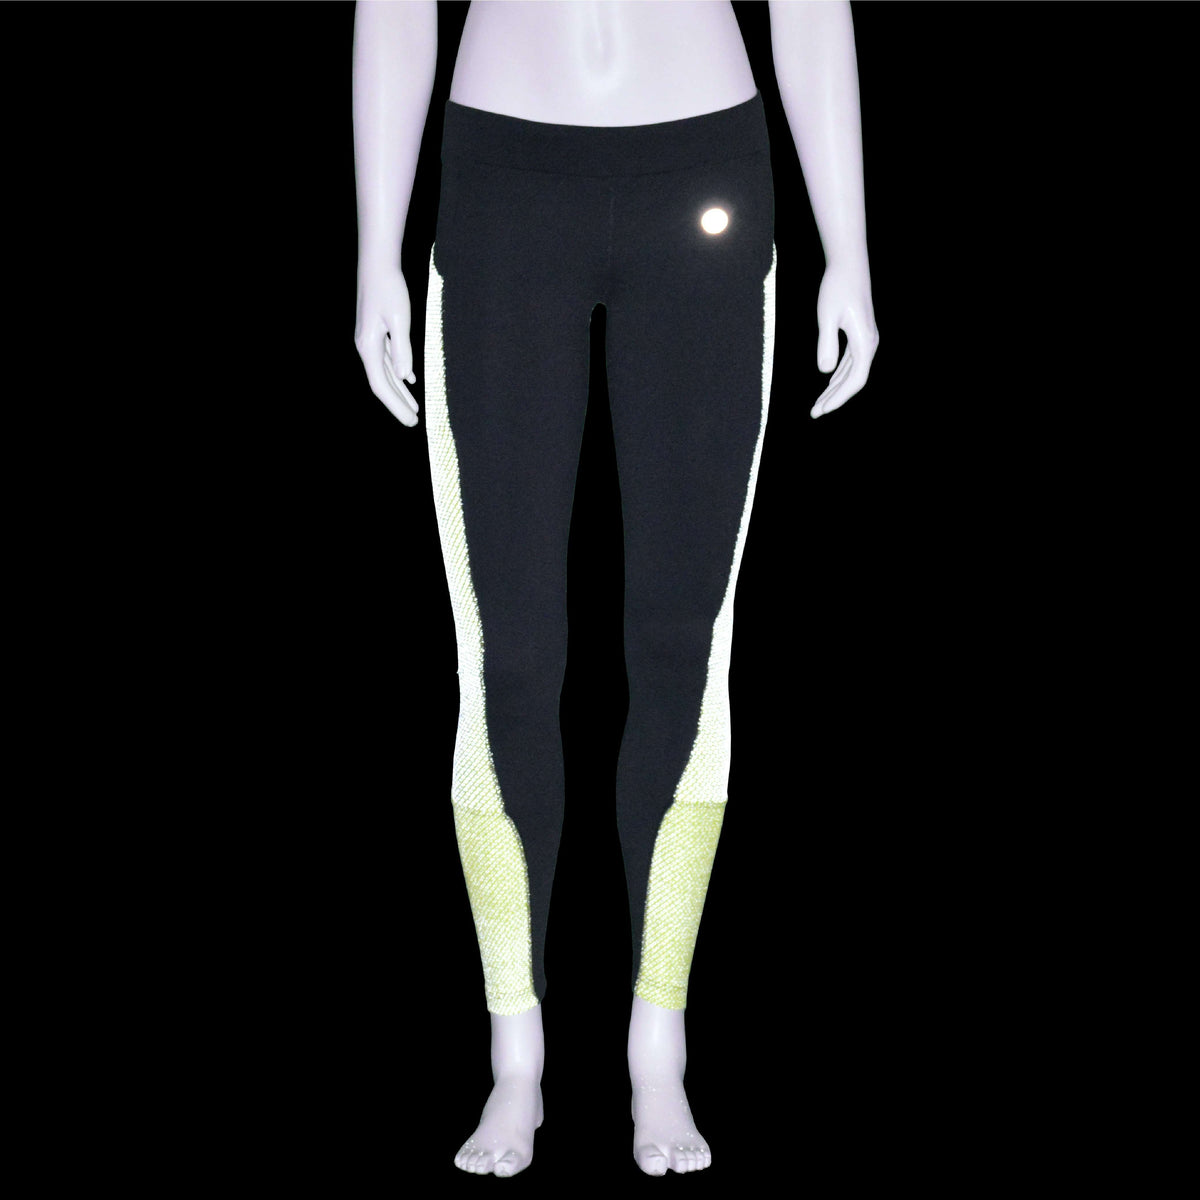 Comet Reflective Women's Running Tight in Black/Flo Lime